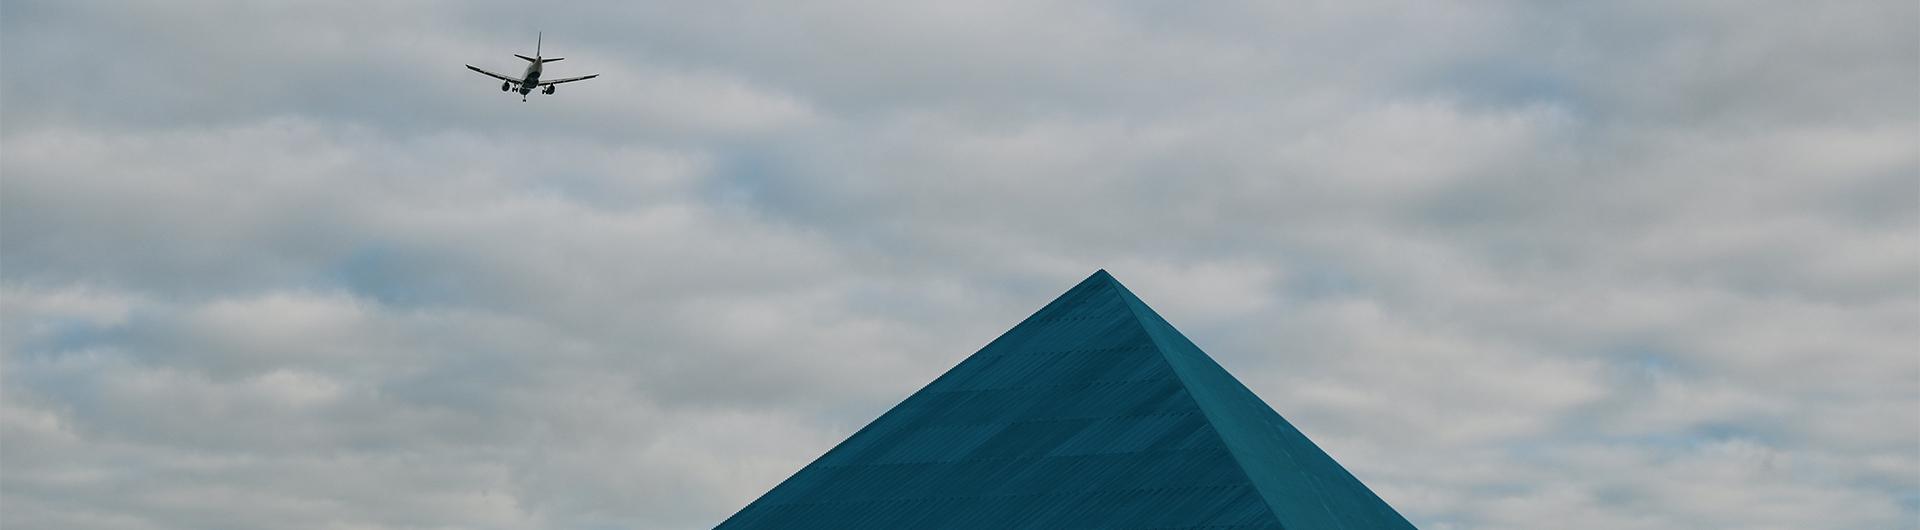 Pyramid and an Airplane in the Clouds